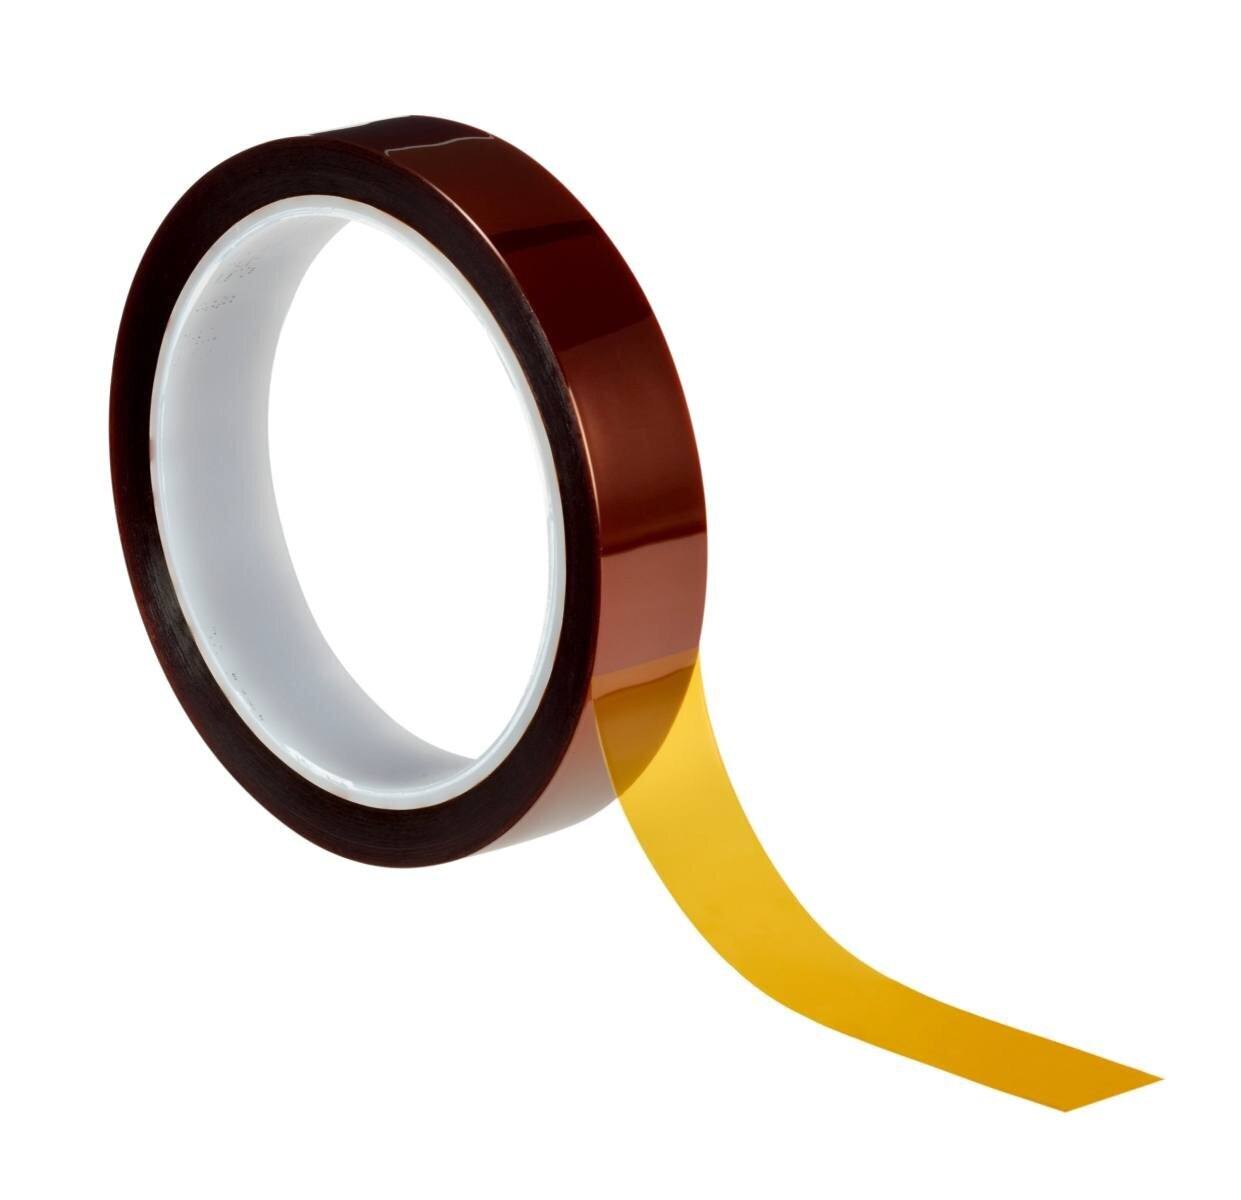 3M high temperature polyimide adhesive tape 5413, brown, 15.9 mm x 33 m, 68.58 µm